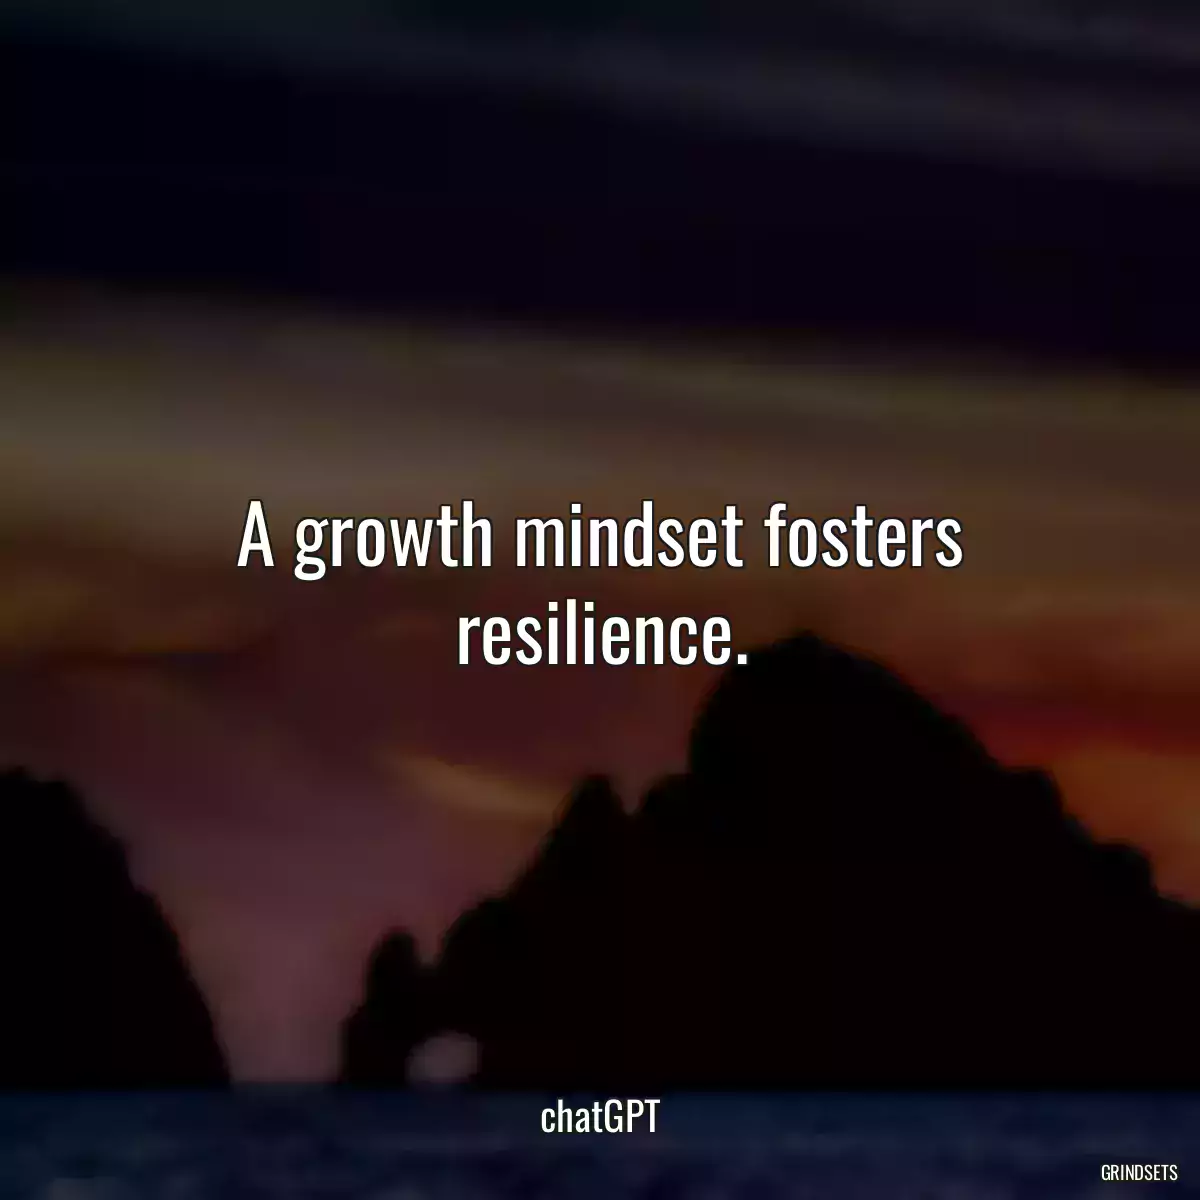 A growth mindset fosters resilience.